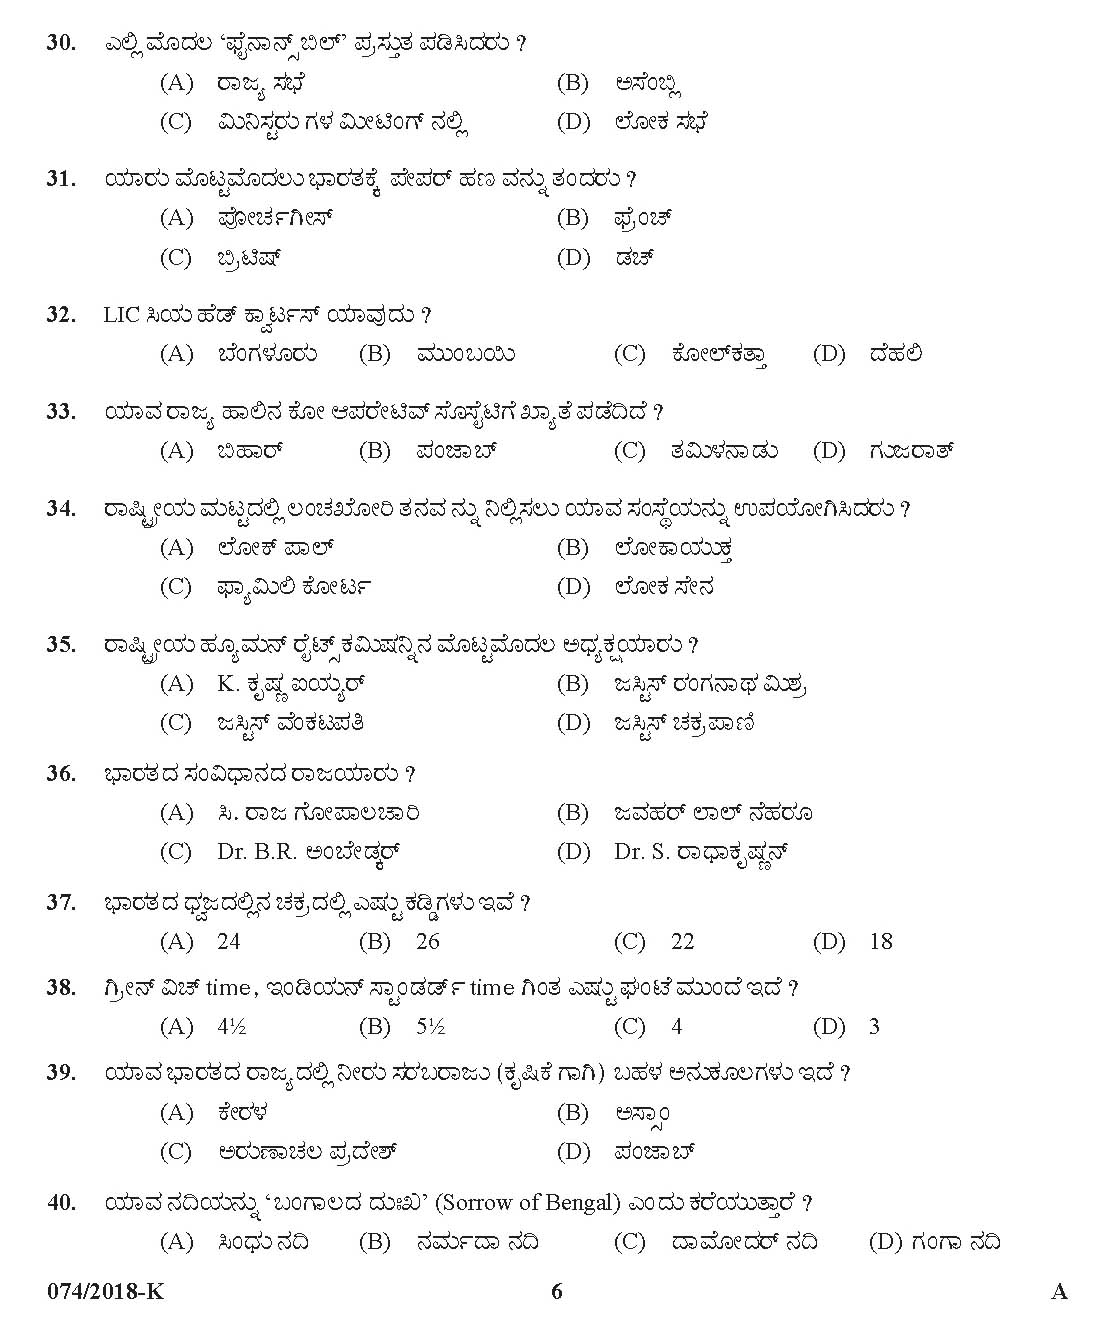 Kerala PSC Police Constable Driver Exam Question Paper Code 0742018 K 5